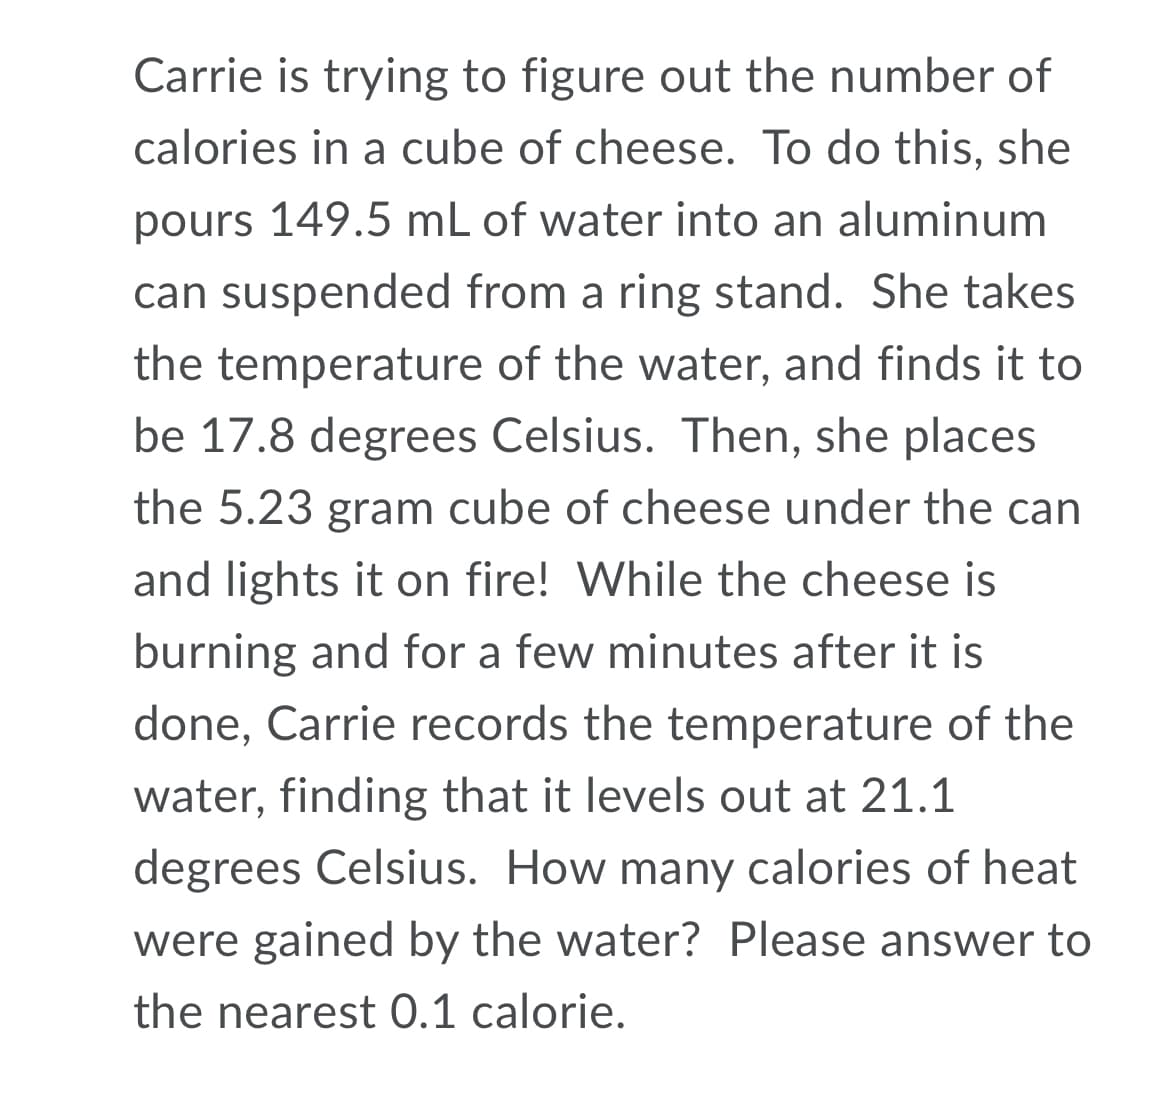 Carrie is trying to figure out the number of
calories in a cube of cheese. To do this, she
pours 149.5 mL of water into an aluminum
can suspended from a ring stand. She takes
the temperature of the water, and finds it to
be 17.8 degrees Celsius. Then, she places
the 5.23 gram cube of cheese under the can
and lights it on fire! While the cheese is
burning and for a few minutes after it is
done, Carrie records the temperature of the
water, finding that it levels out at 21.1
degrees Celsius. How many calories of heat
were gained by the water? Please answer to
the nearest 0.1 calorie.
